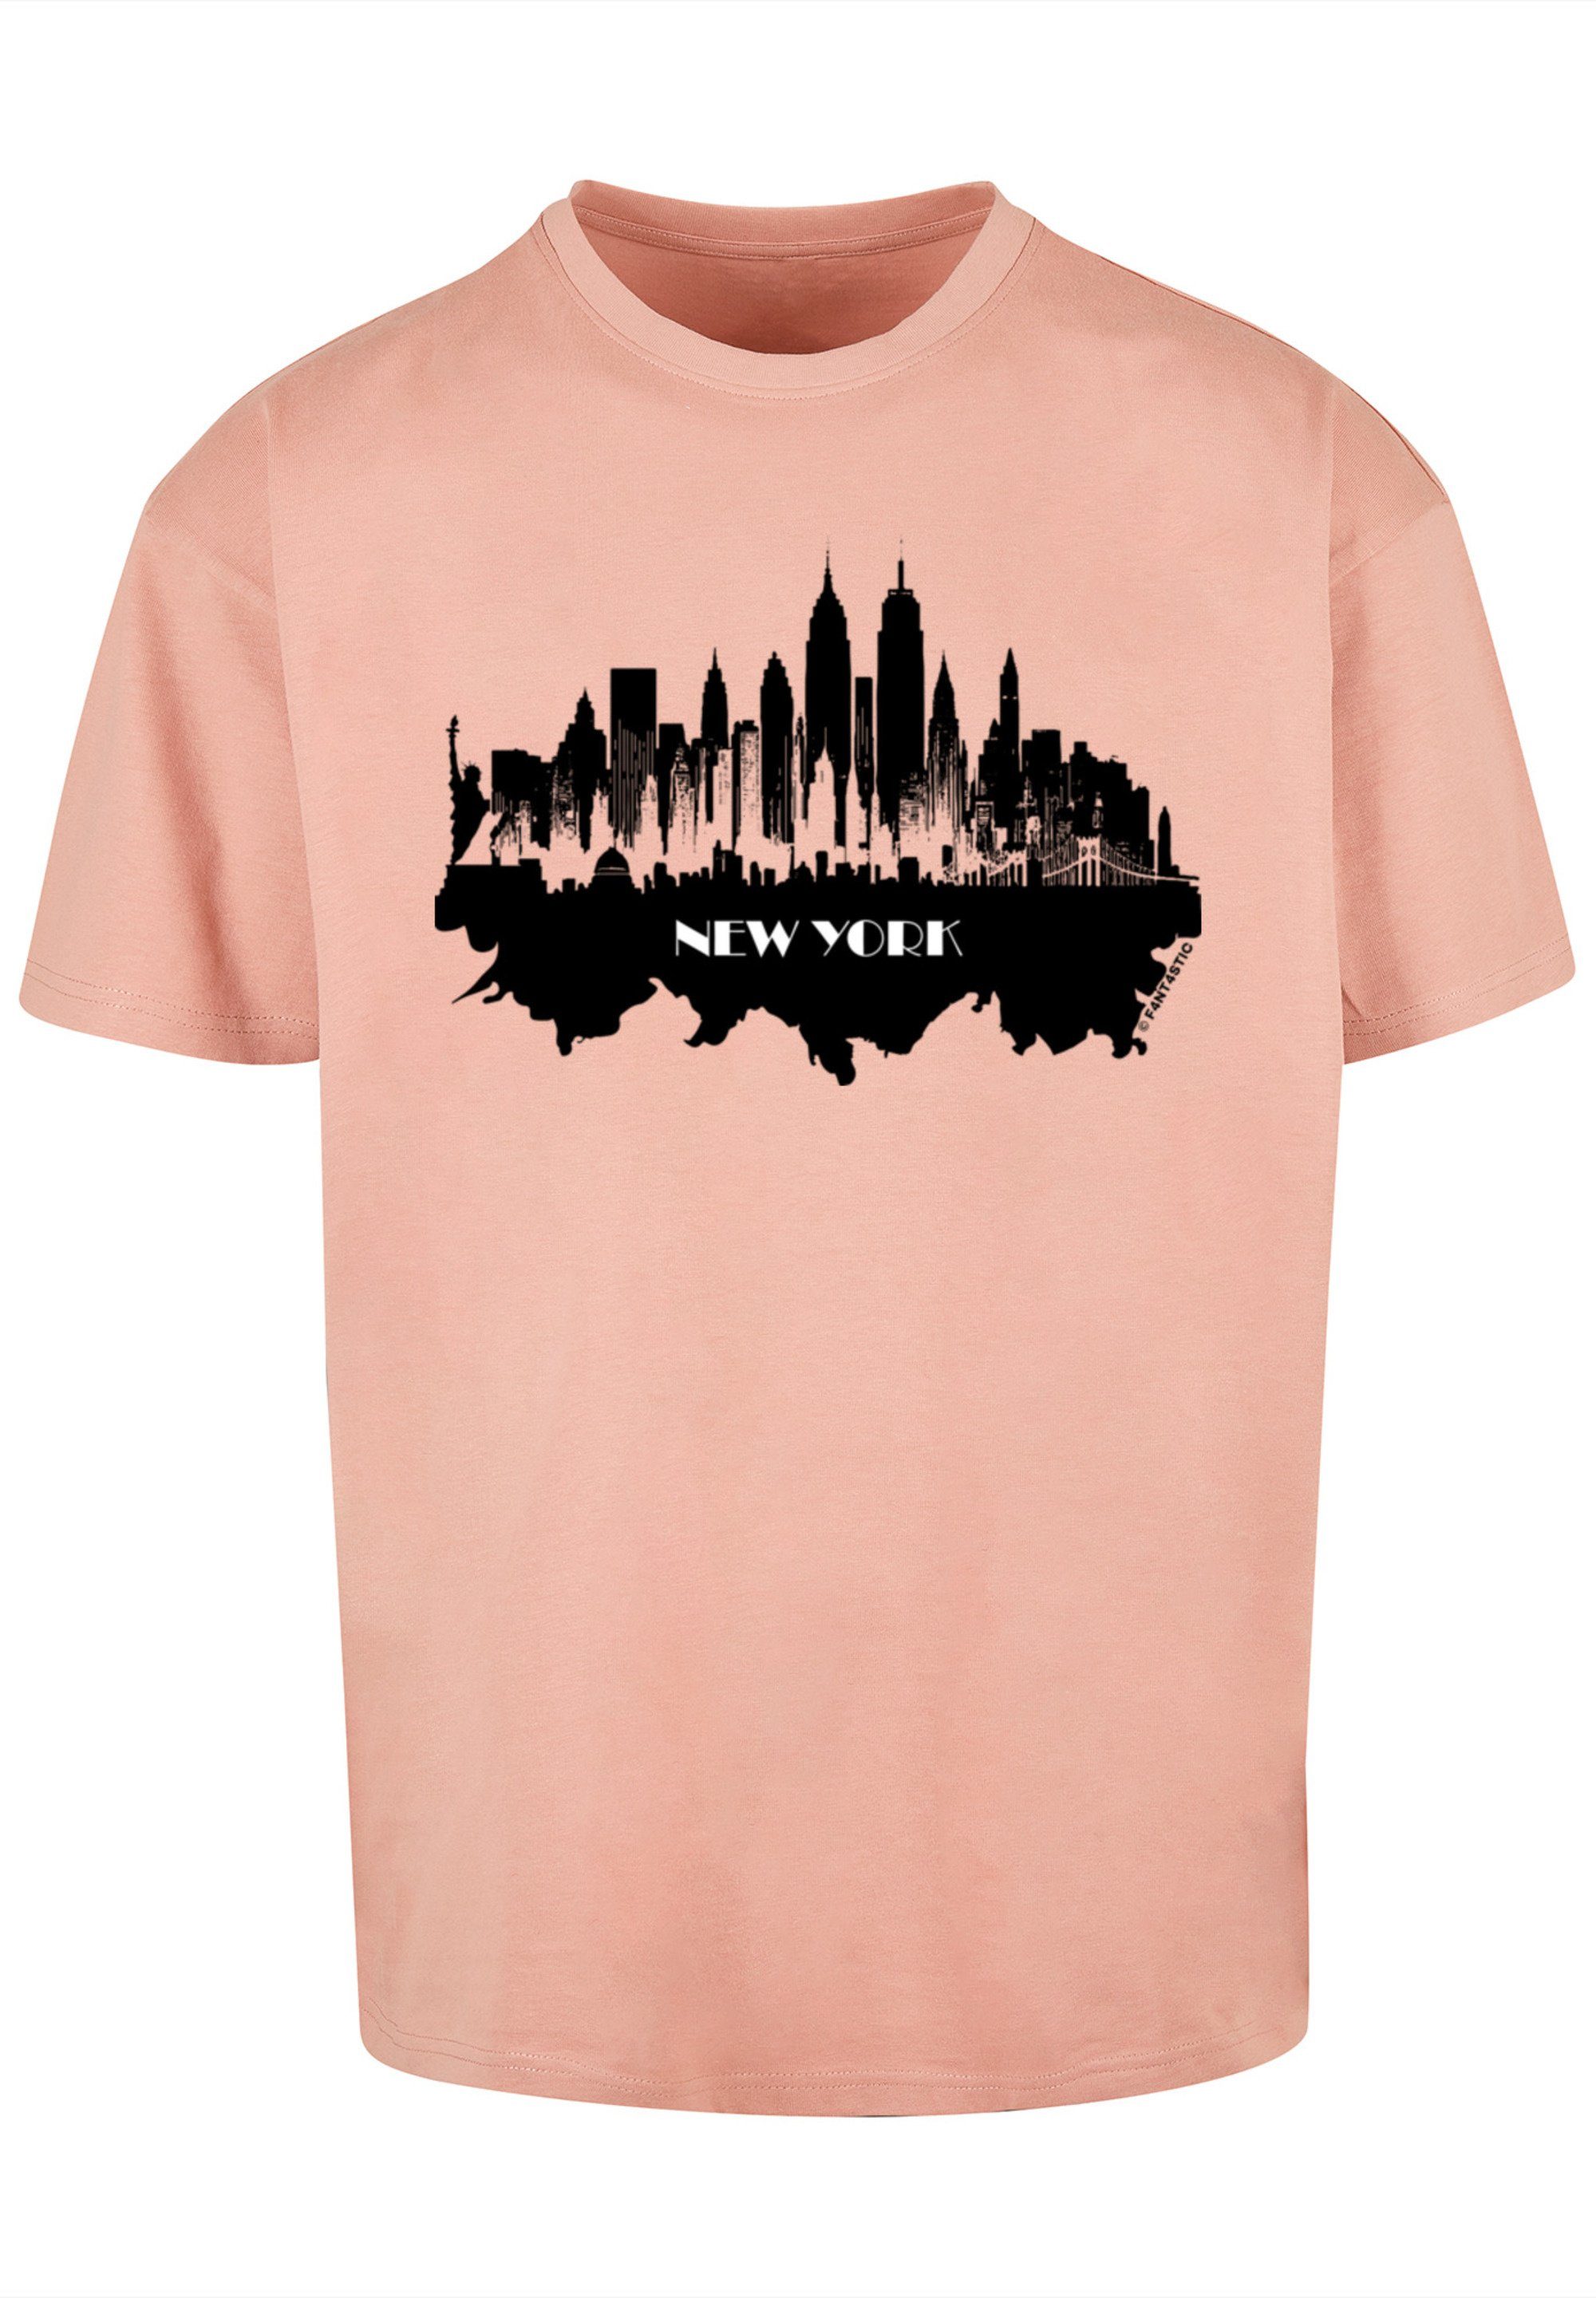 Cities skyline York Collection F4NT4STIC T-Shirt amber New Print -